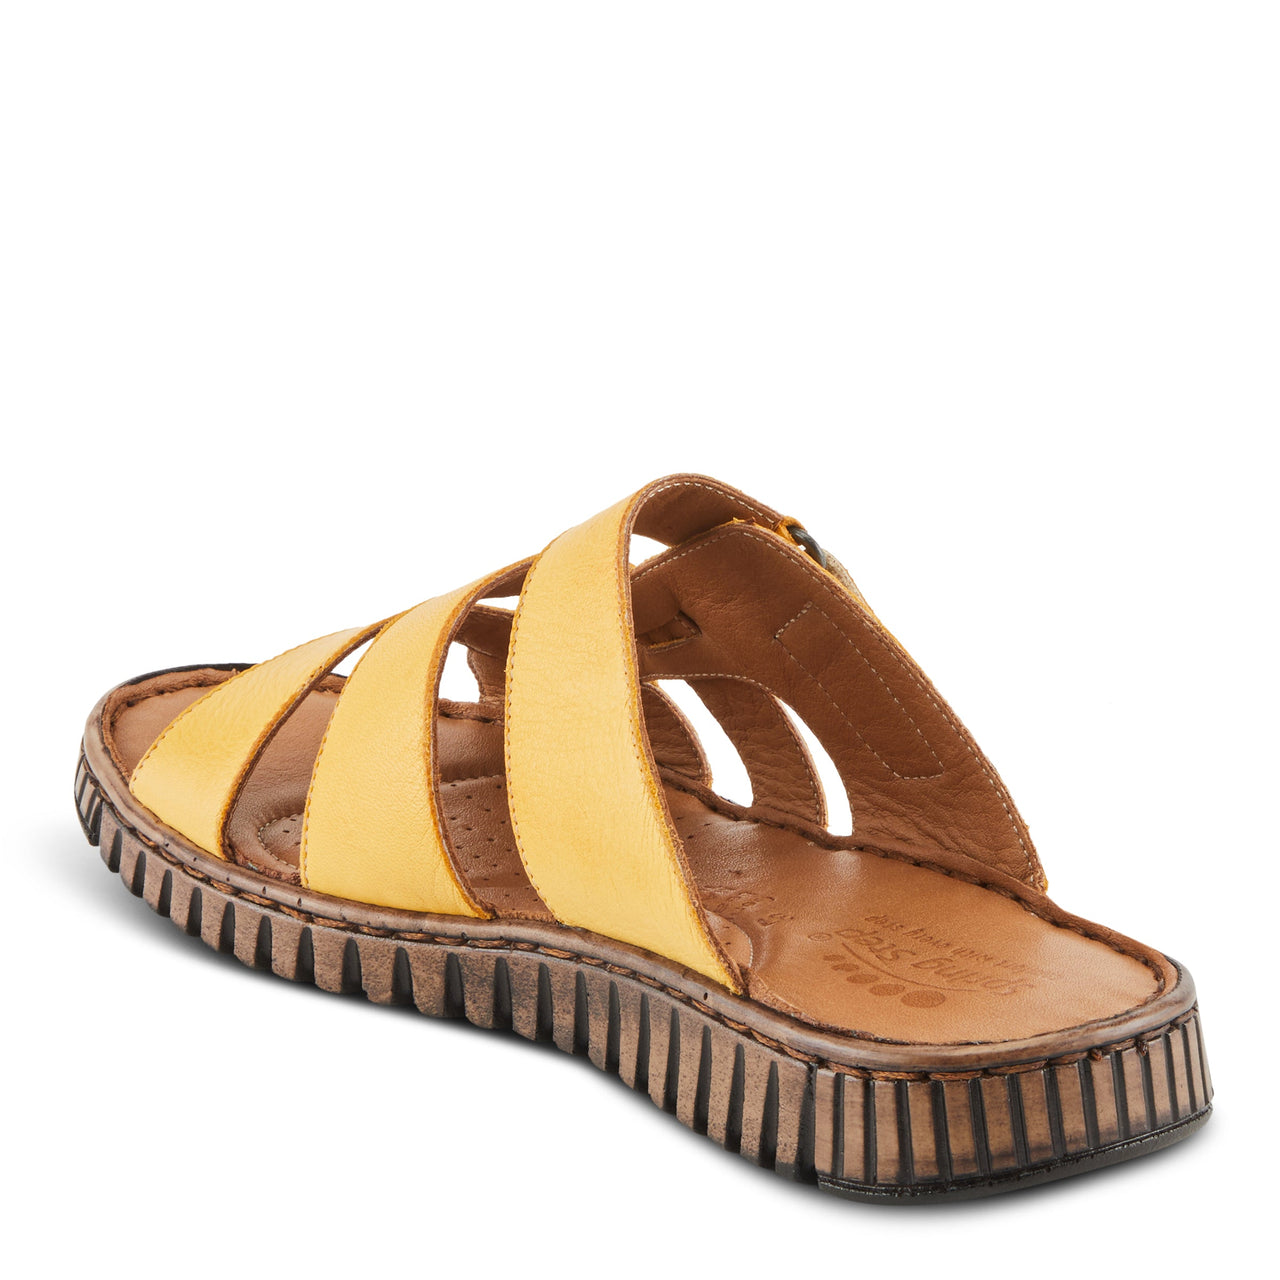 A pair of comfortable and stylish Spring Step Olly Sandals in brown leather